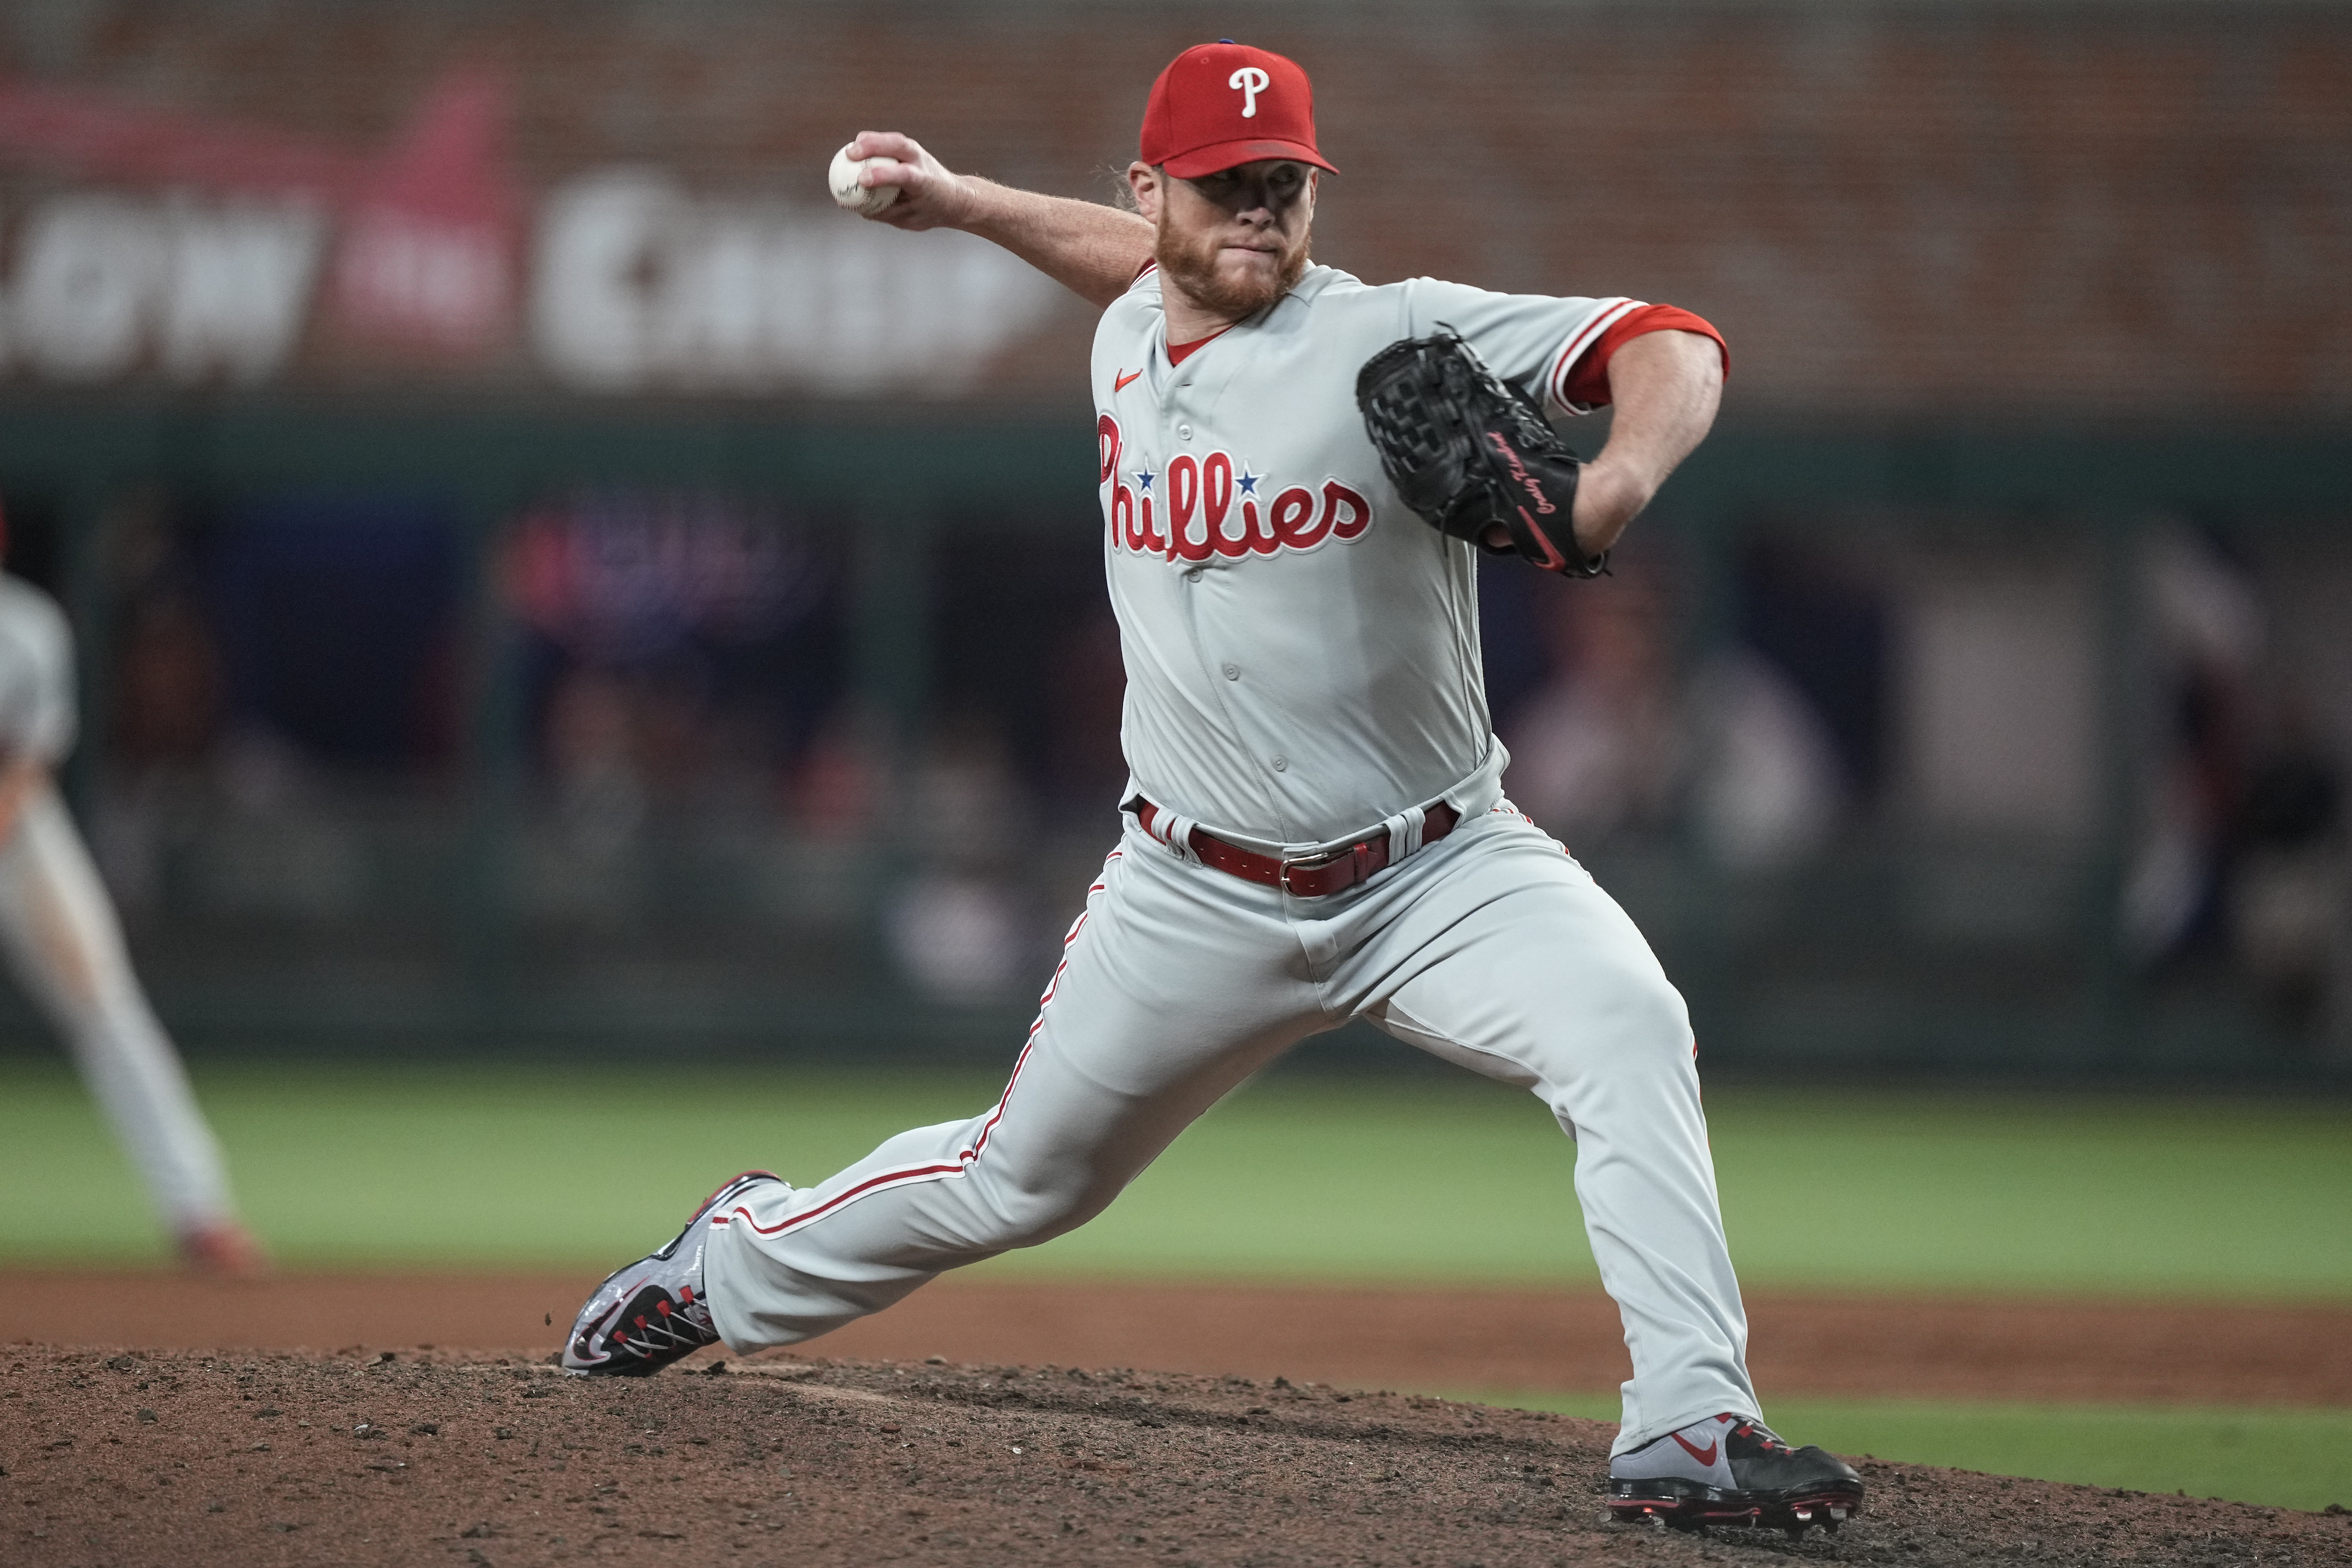 Kimbrel 8th Pitcher in MLB History to Earn 400 Saves, Phillies